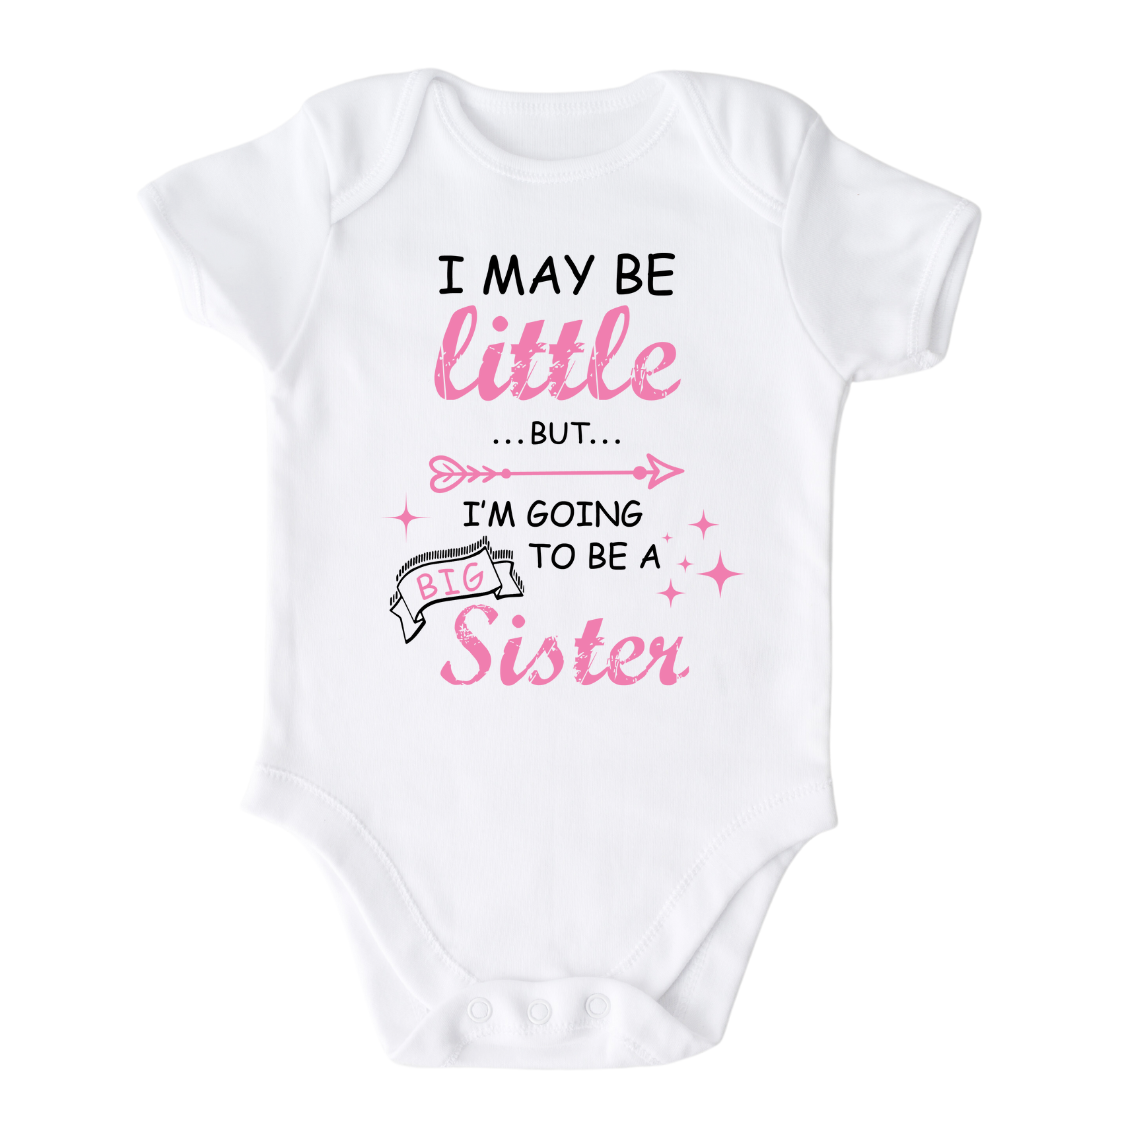 Baby Onesie® Big Sister Announcement Infant Clothing for Baby Shower Gift